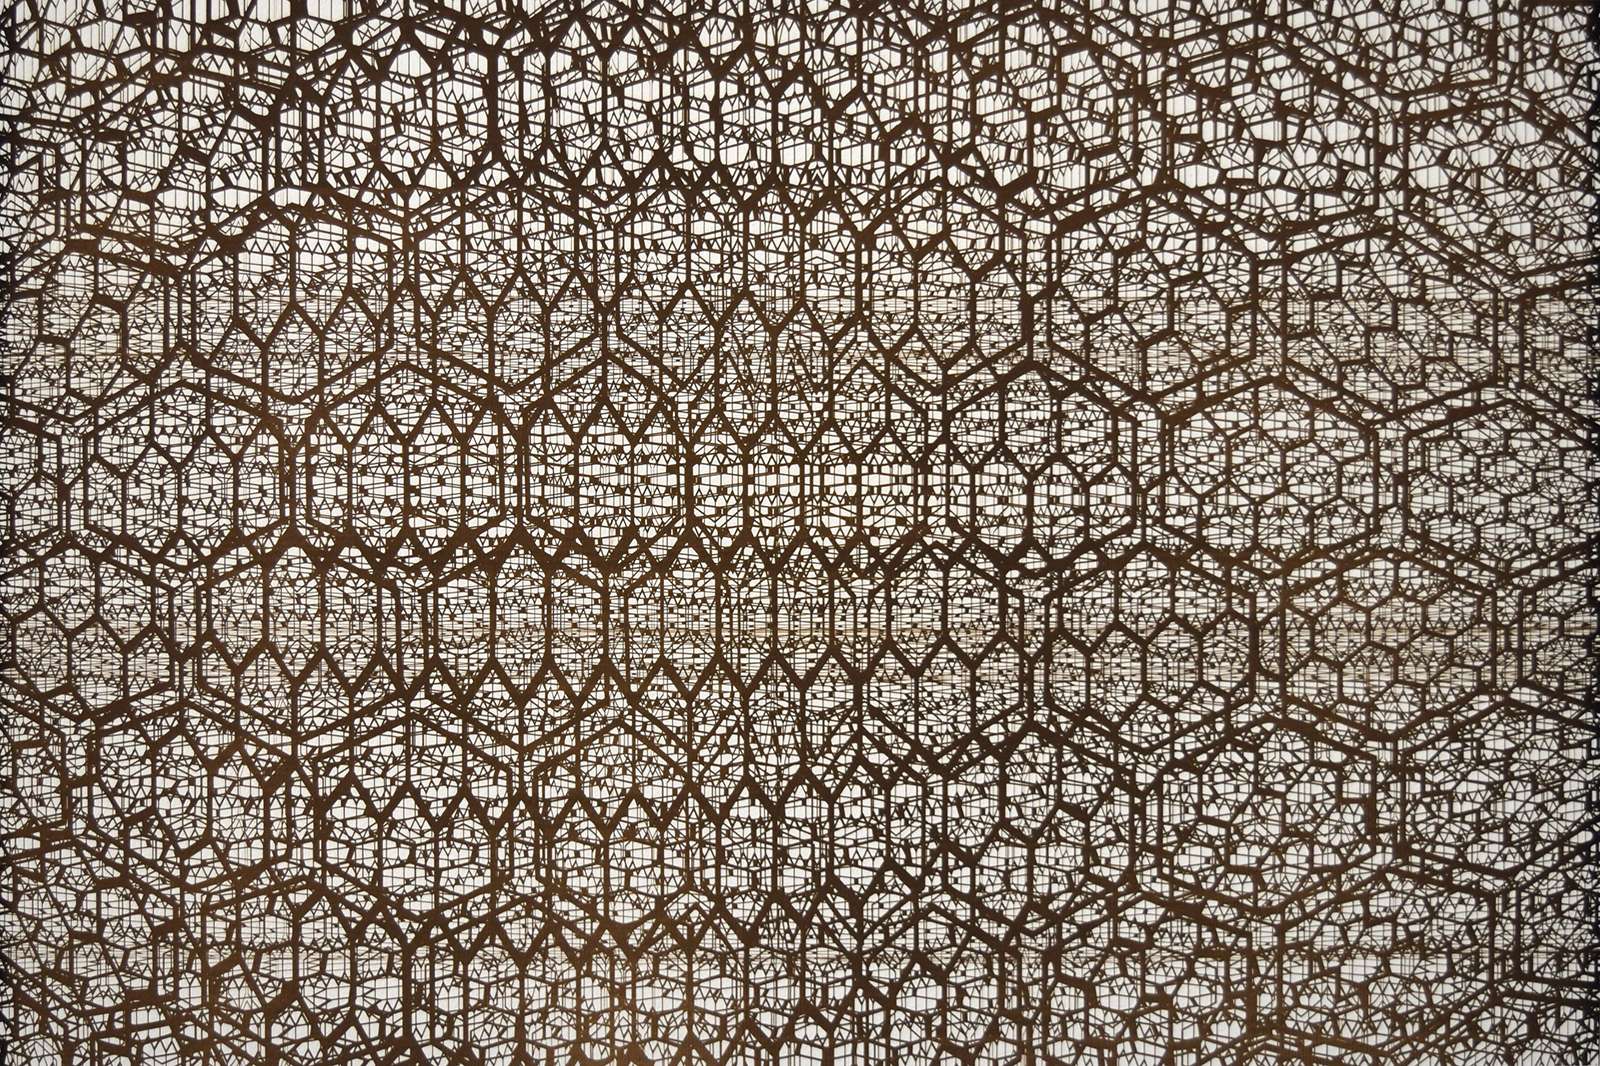 Joseph Cohen, Graphene, 2017. Laser induced graphene on Arches paper. 20 x 30 inches. Courtesy the artist